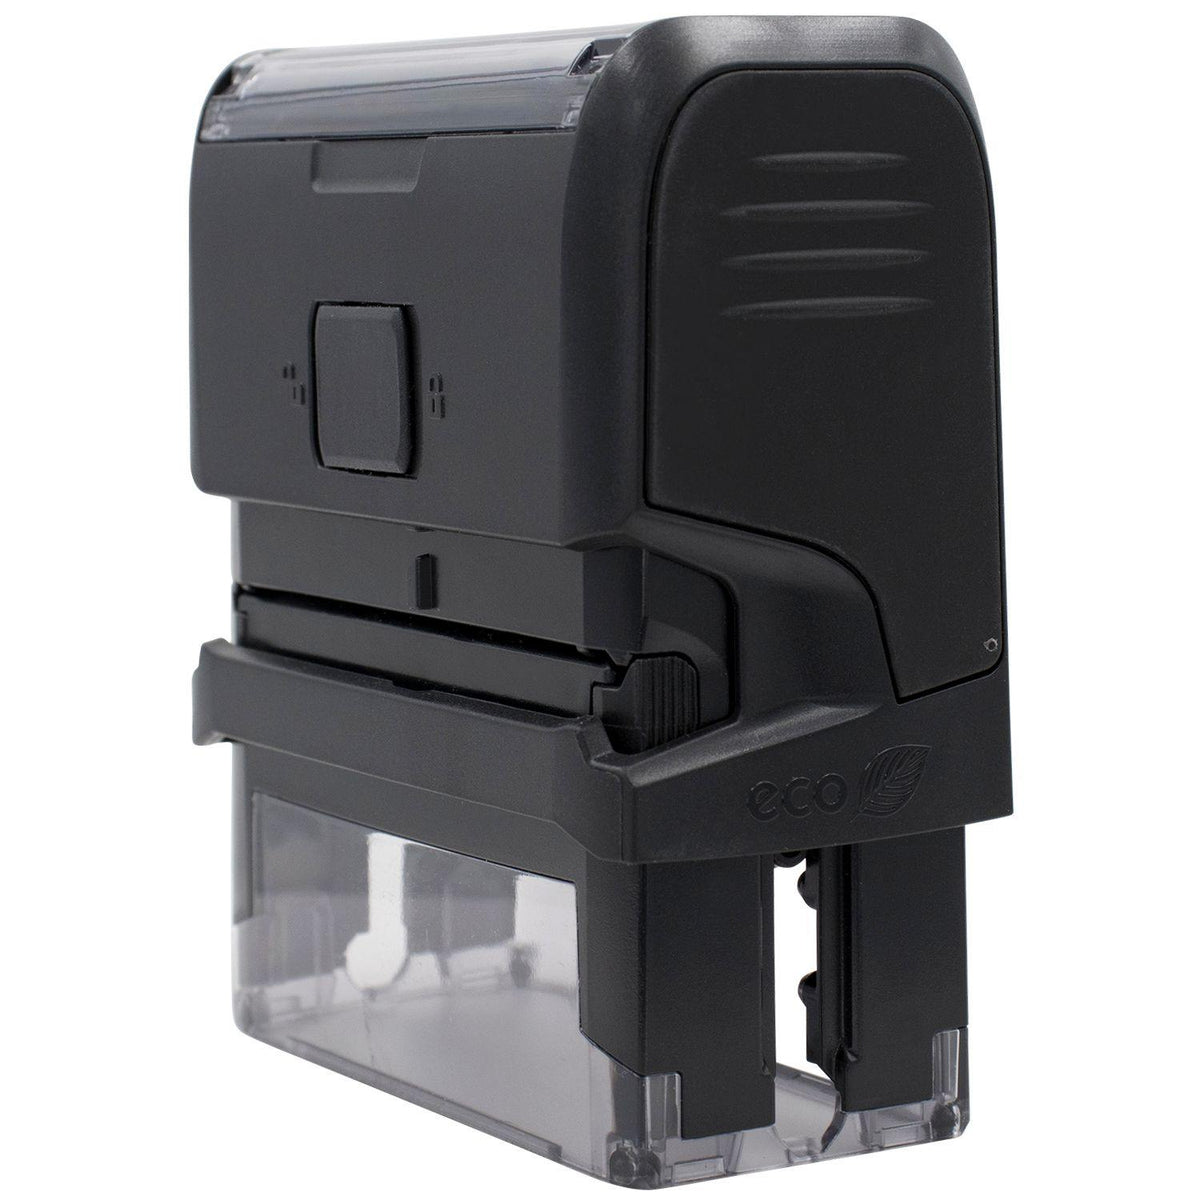 Side View of Large Self-Inking Certificada Stamp at an Angle